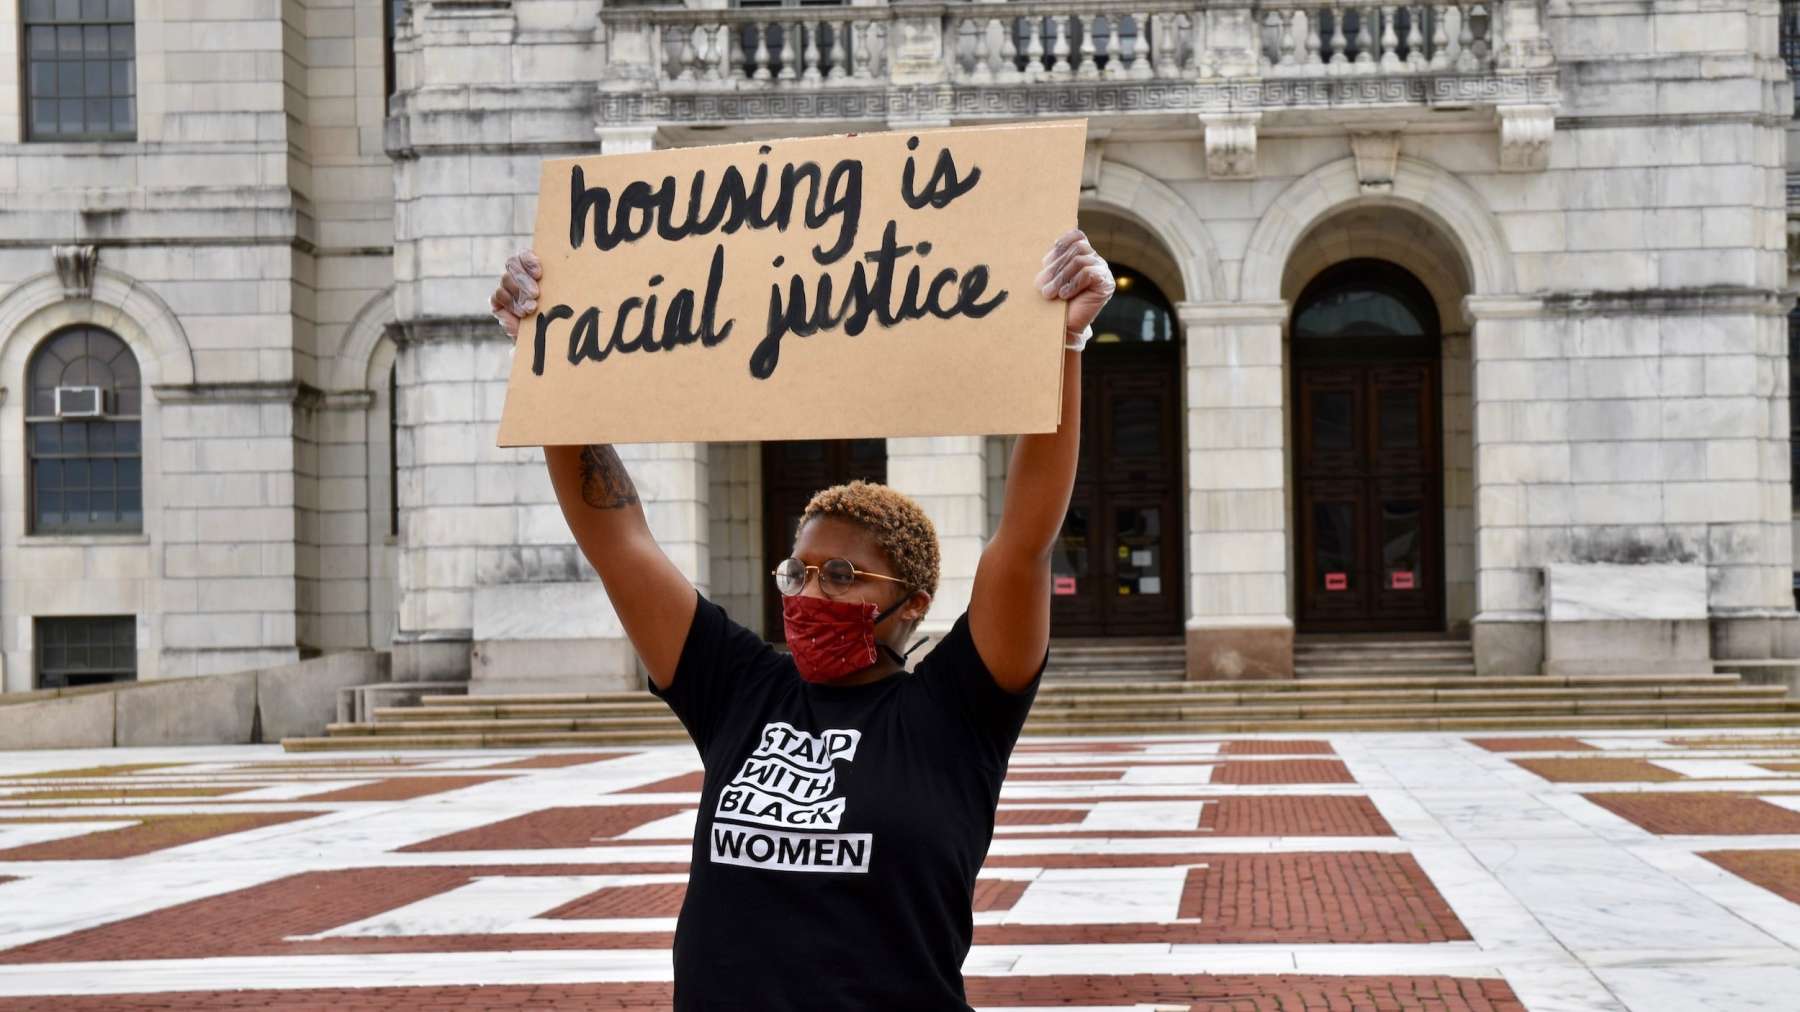 State House Rally calls for an eviction moratorium and rental assistance